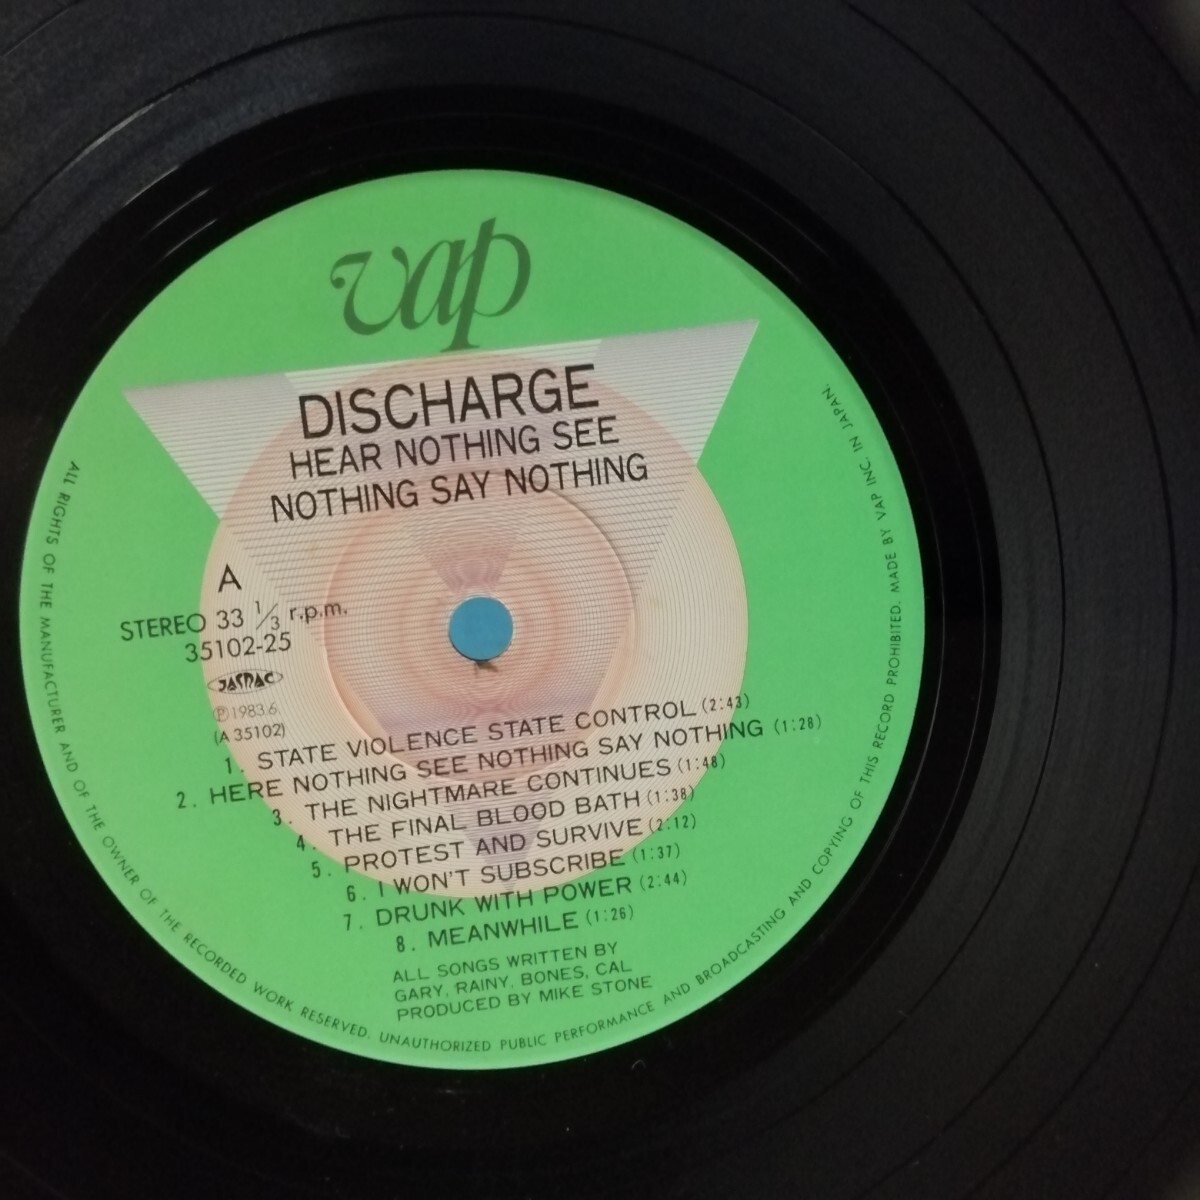 D04 中古LP 中古レコード　ディスチャージ　DISCHARGE hear nothing see nothing say nothing 国内盤　35102-25_画像7